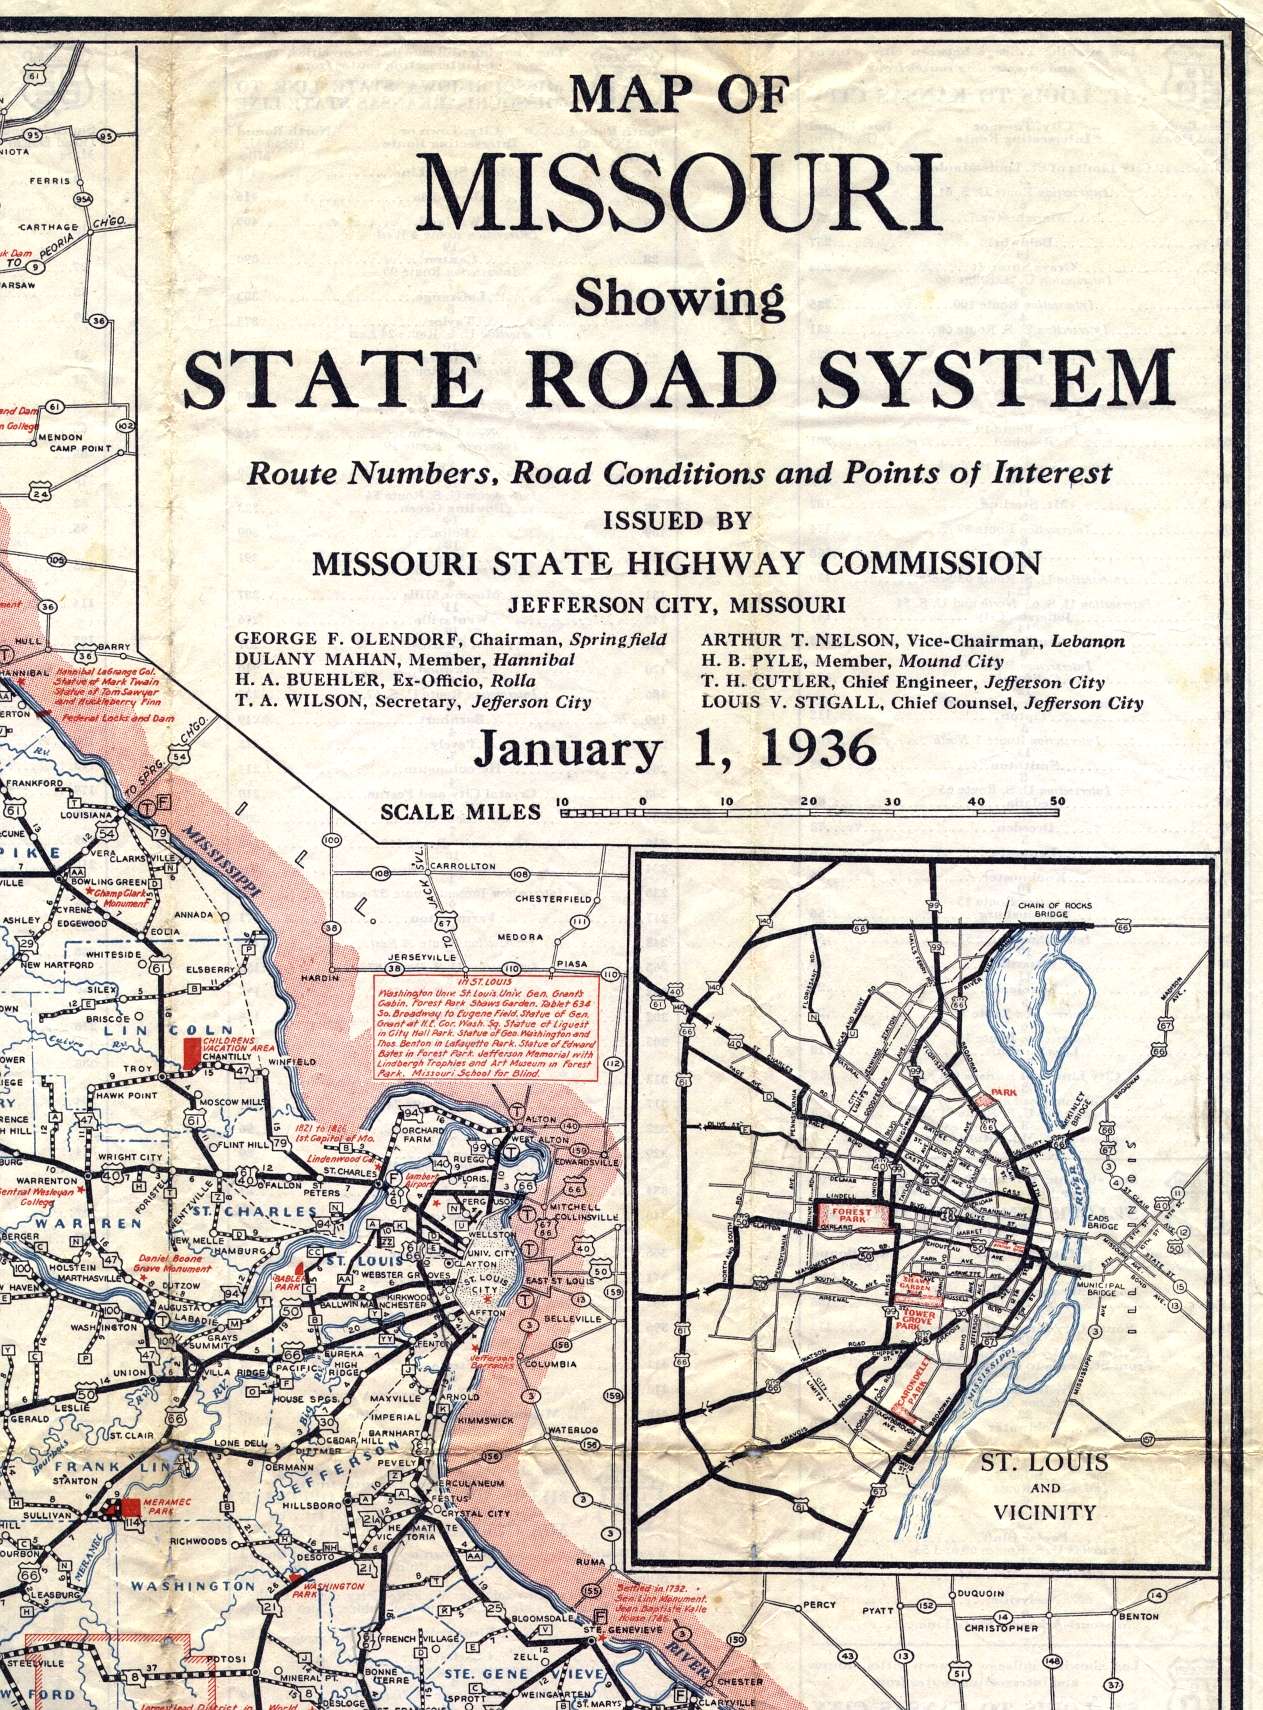 Section of 1936 official highway map for Missouri